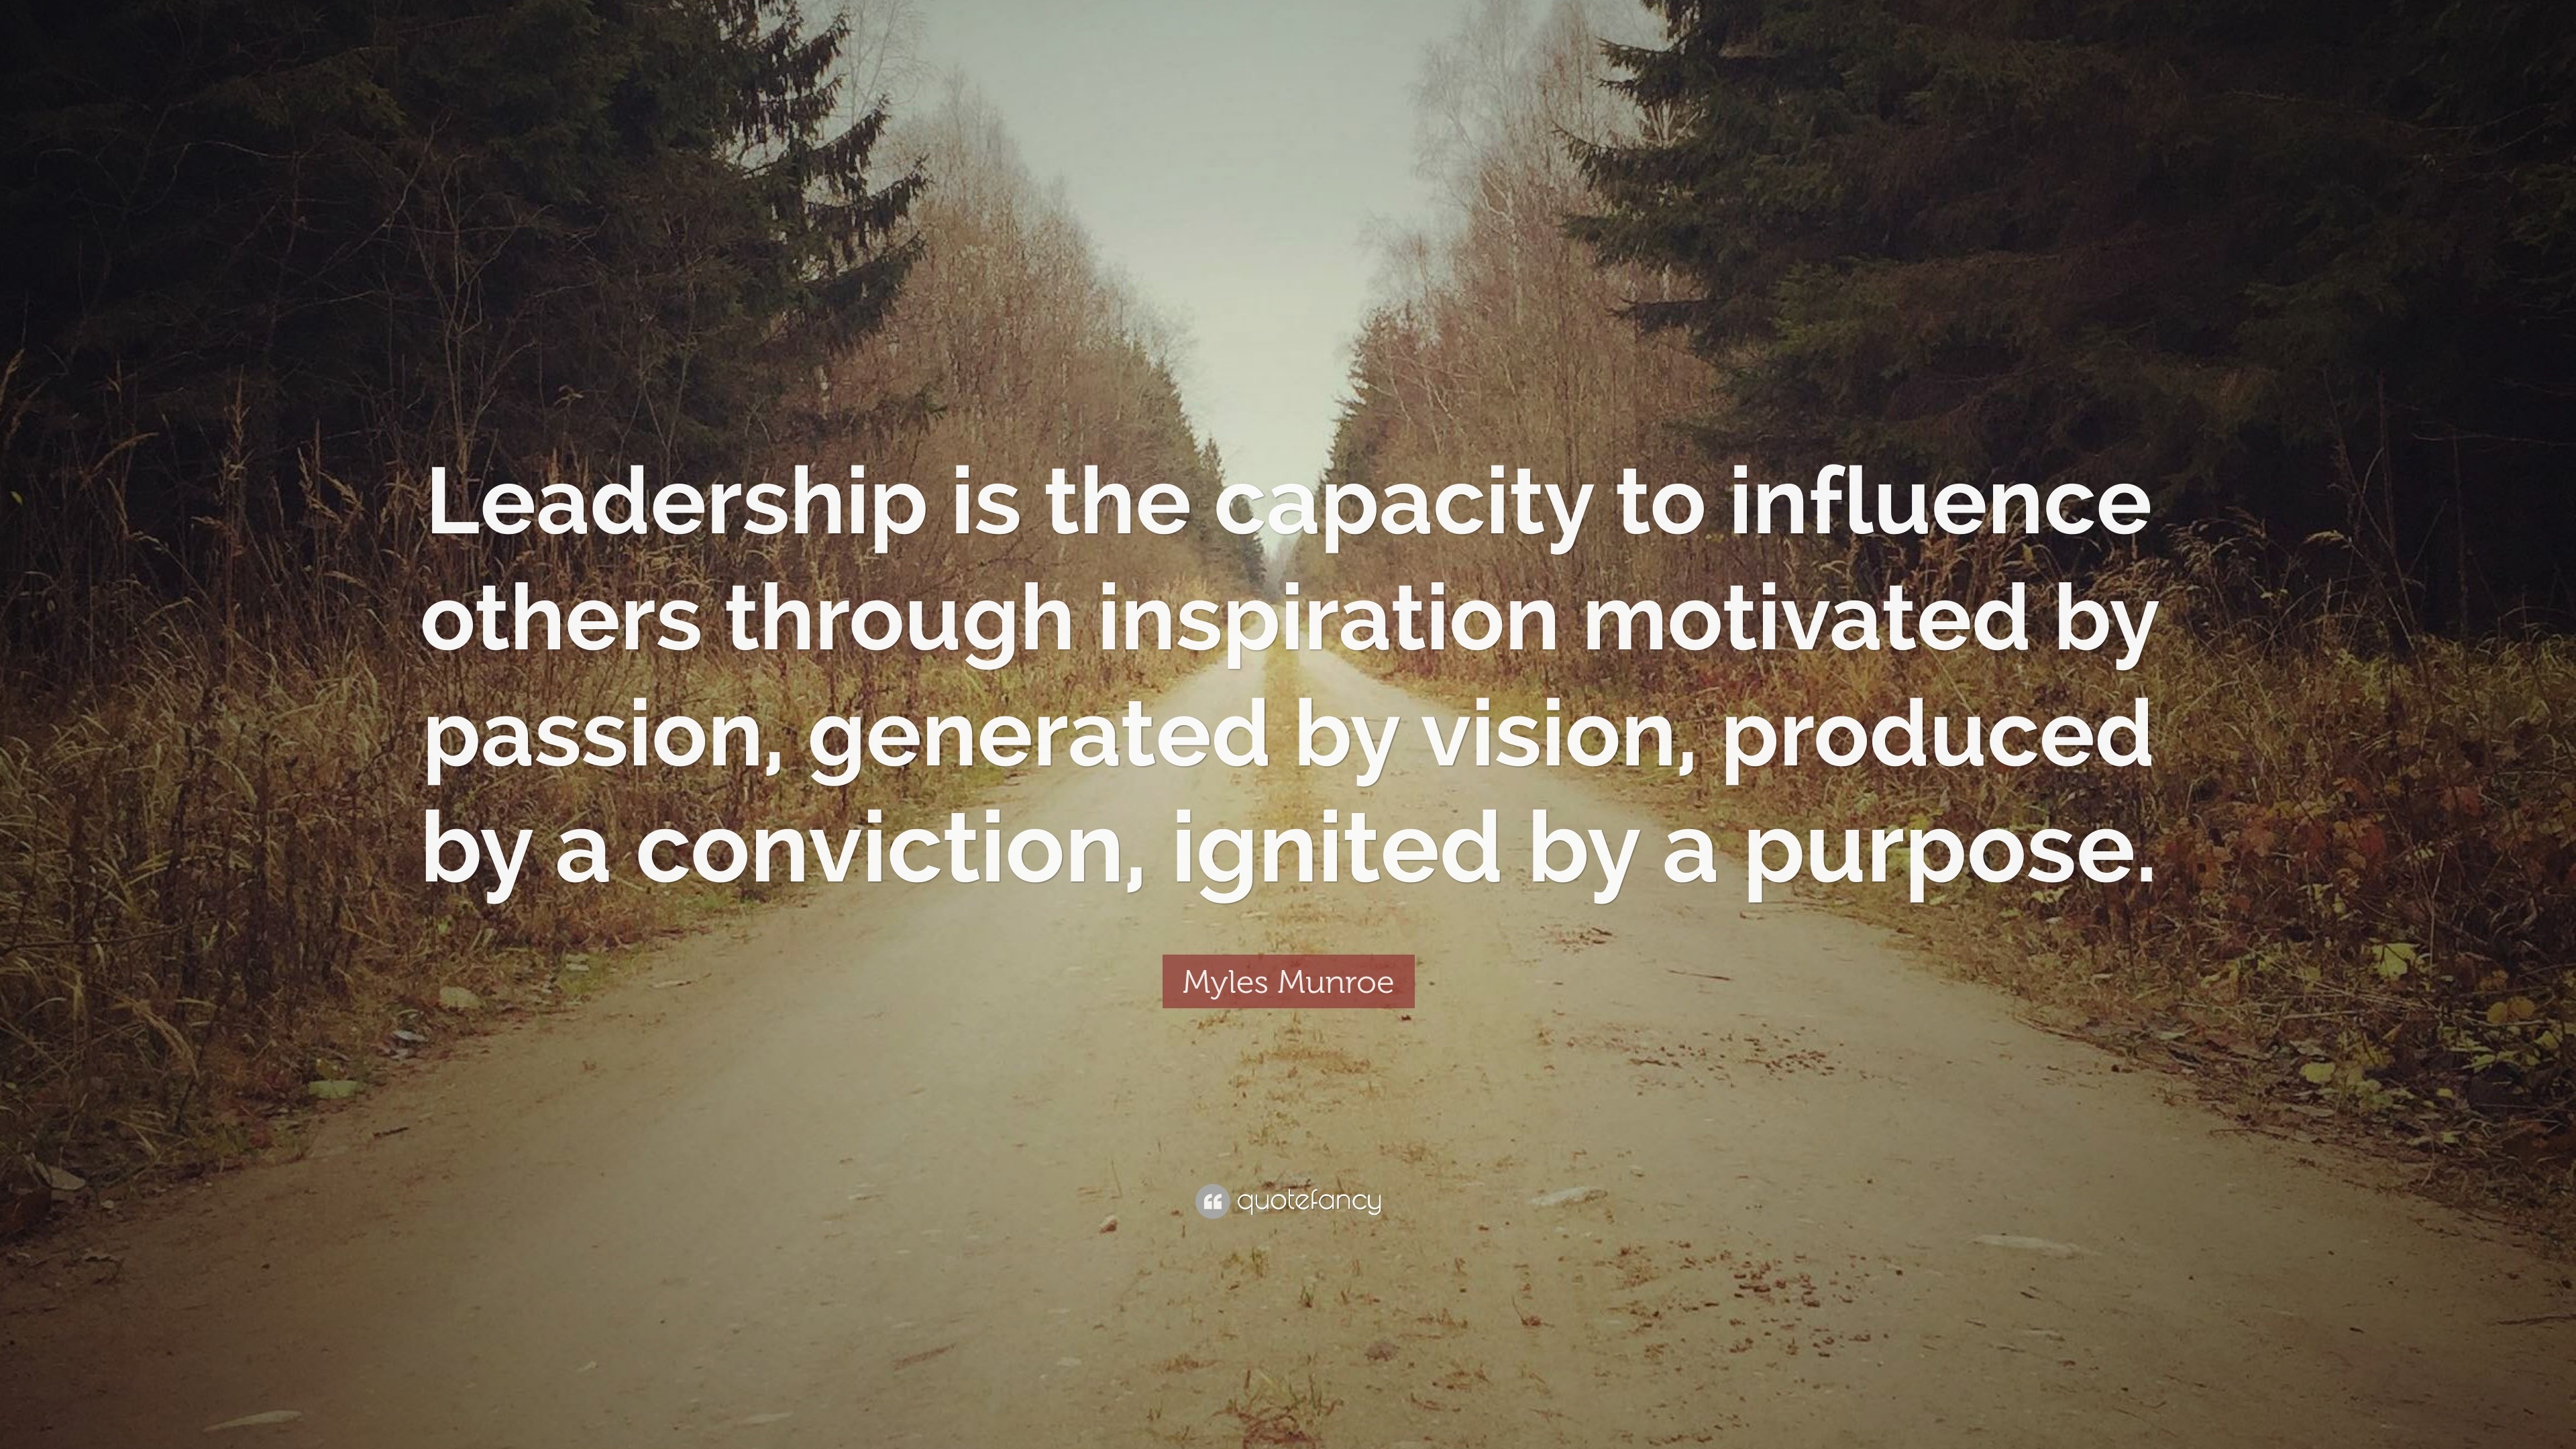 Myles Munroe Quote: “Leadership is the capacity to influence others